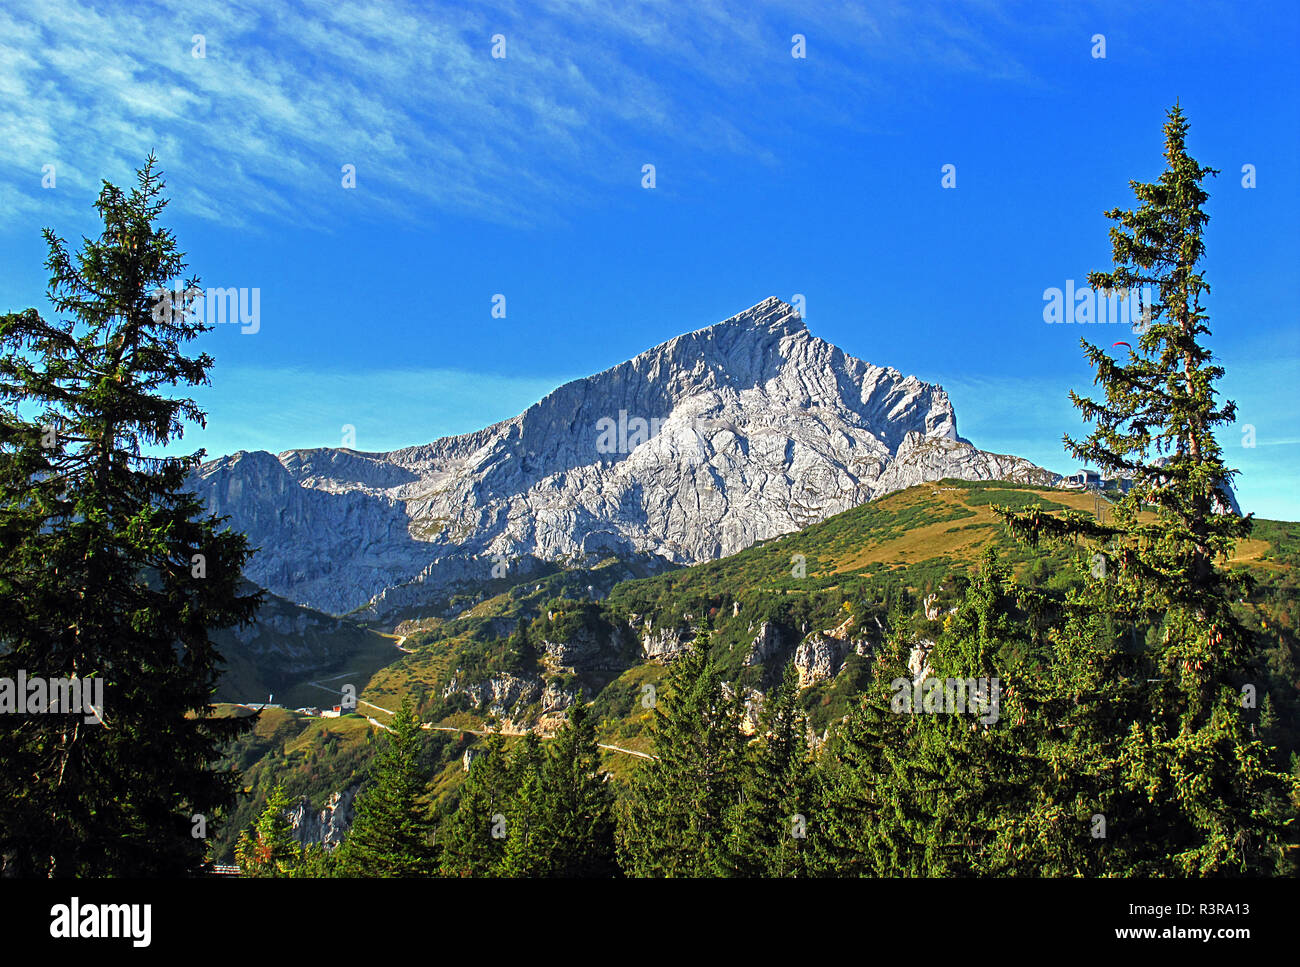 Mount Alpspitze in Bavarian Alps, Germany. Alpspitze is the second ...